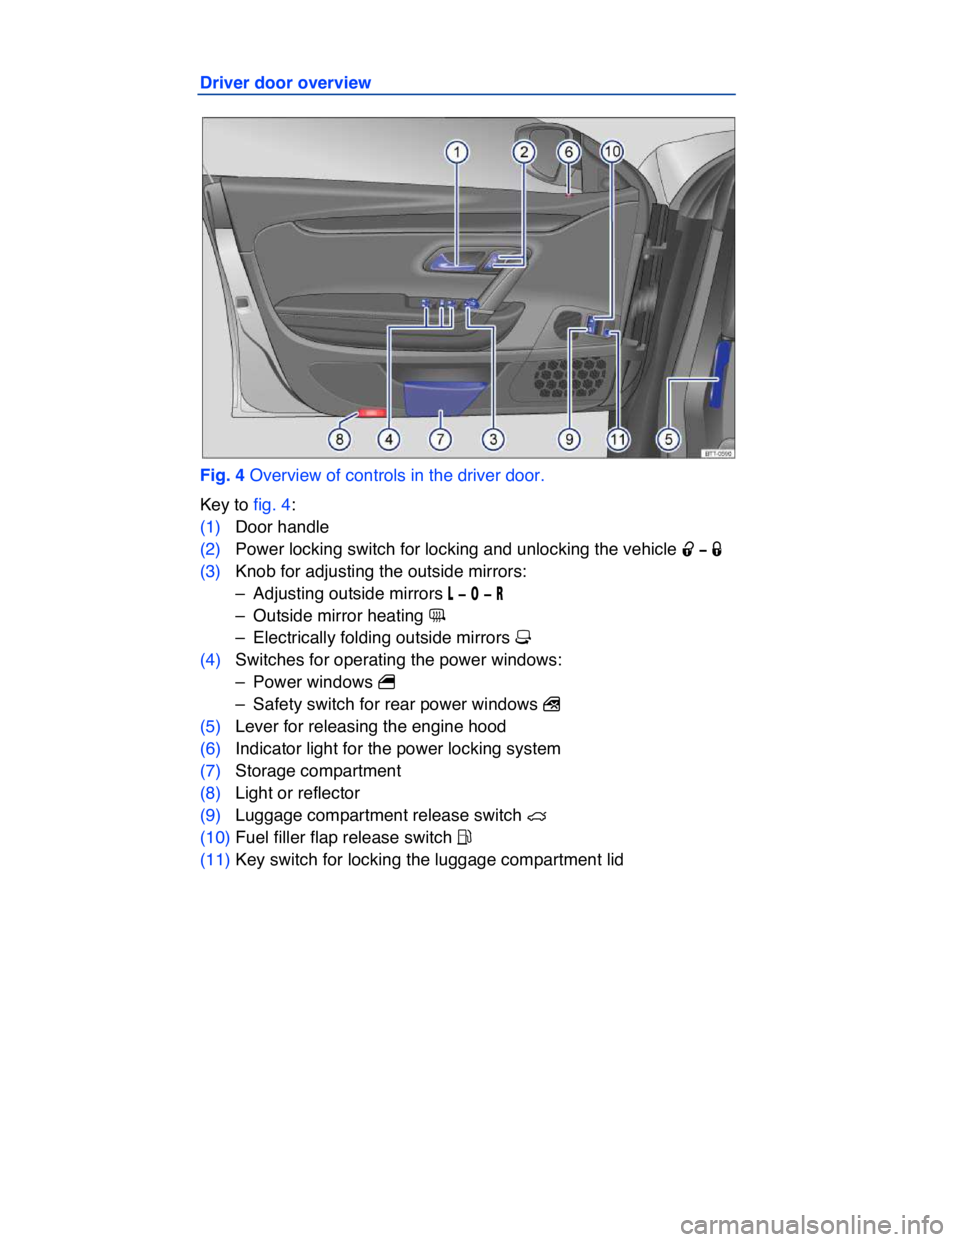 VOLKSWAGEN CC 2017  Owners Manual  
Driver door overview 
 
Fig. 4 Overview of controls in the driver door. 
Key to fig. 4: 
(1) Door handle  
(2) Power locking switch for locking and unlocking the vehicle �0 �